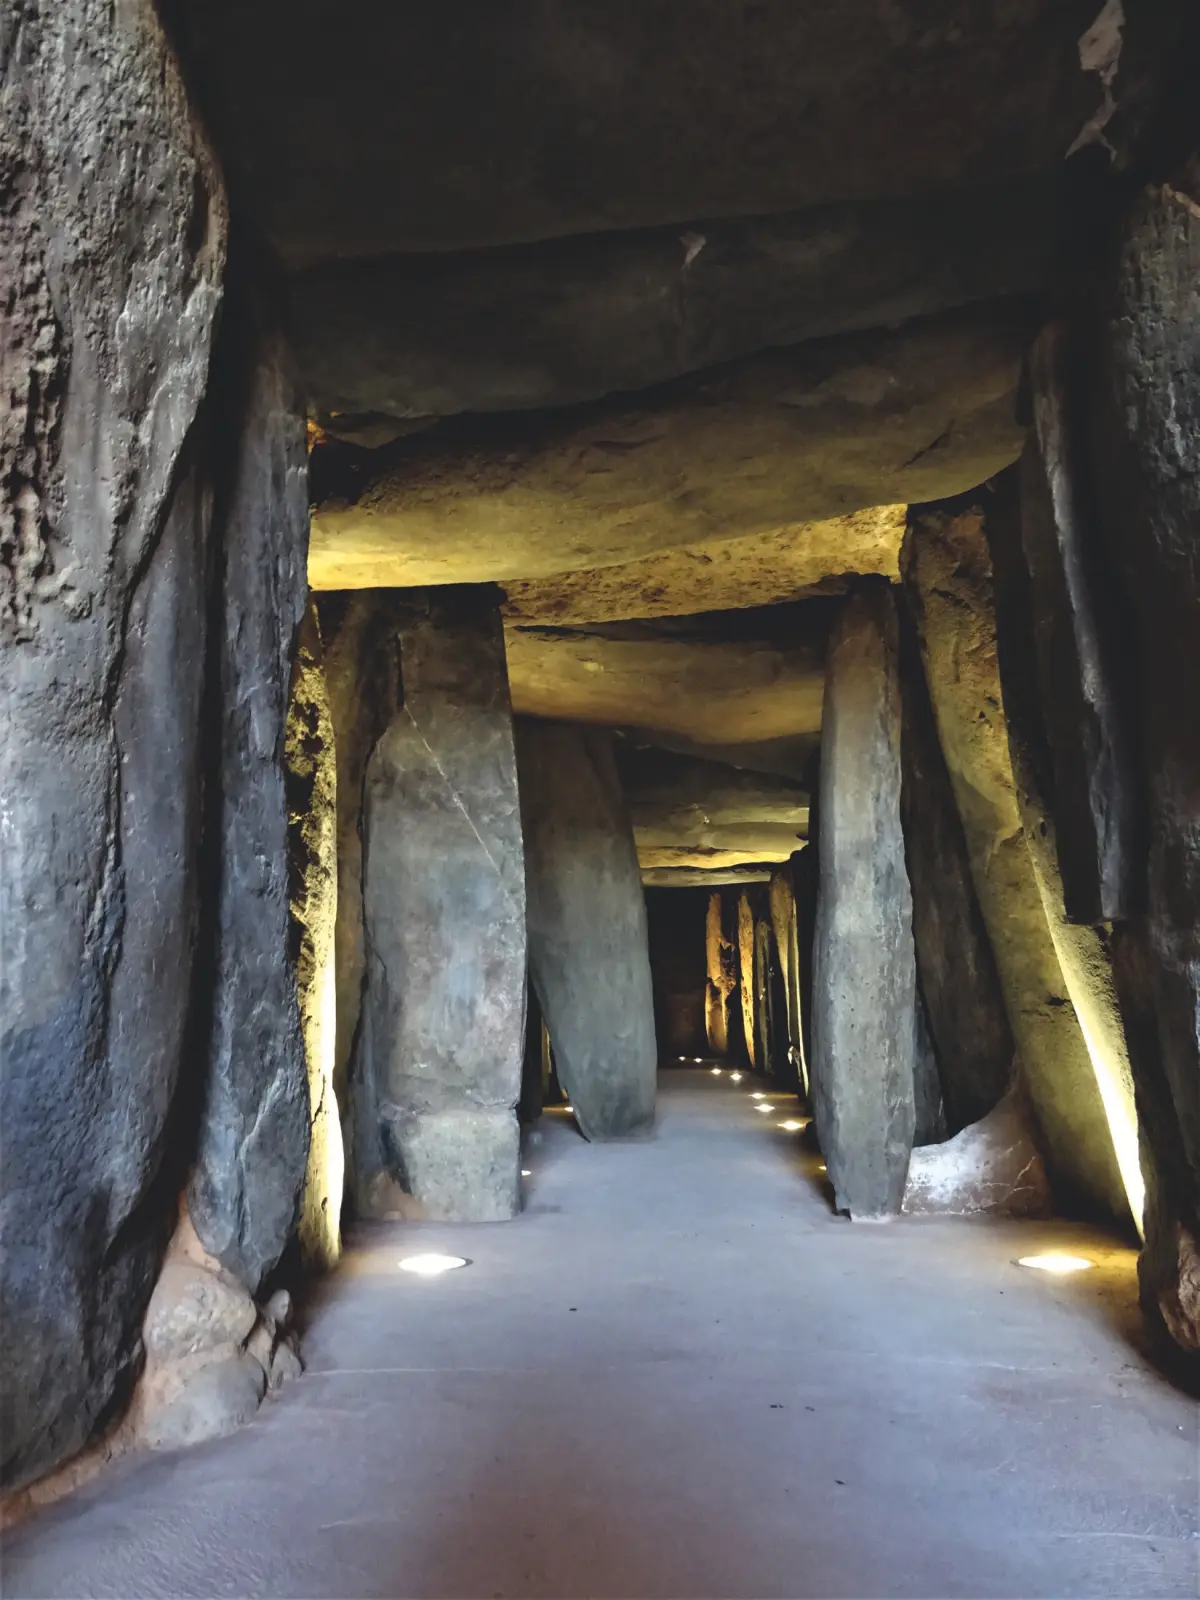 Underground Stonehenge: Mystery of the 5,000-Year-Old Dolmen of Soto in Spain